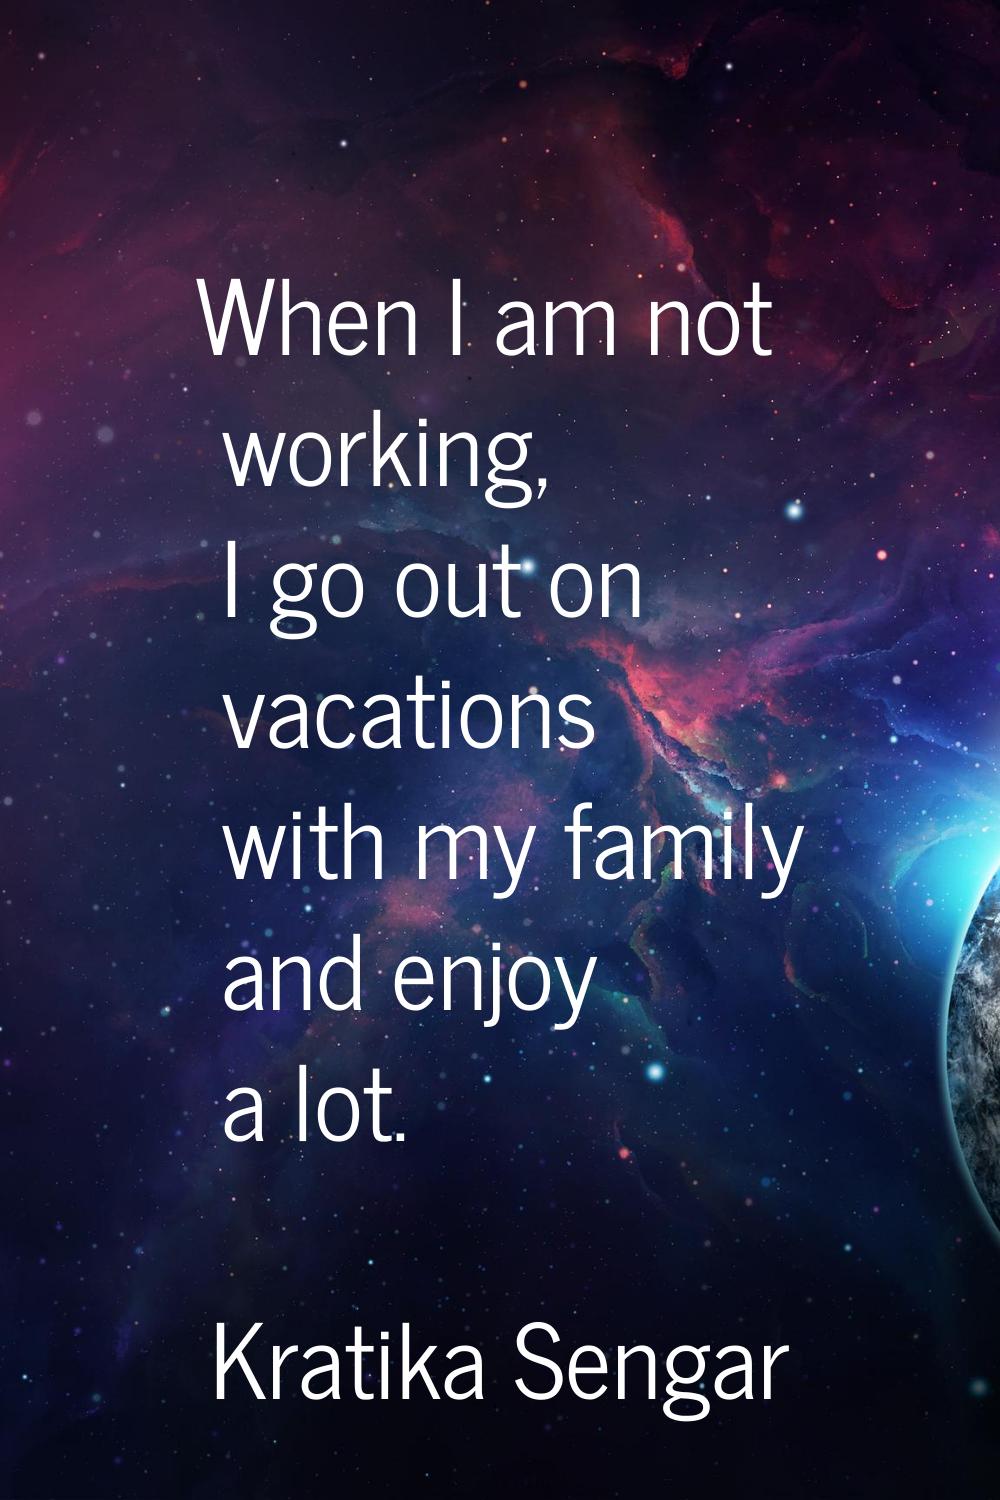 When I am not working, I go out on vacations with my family and enjoy a lot.